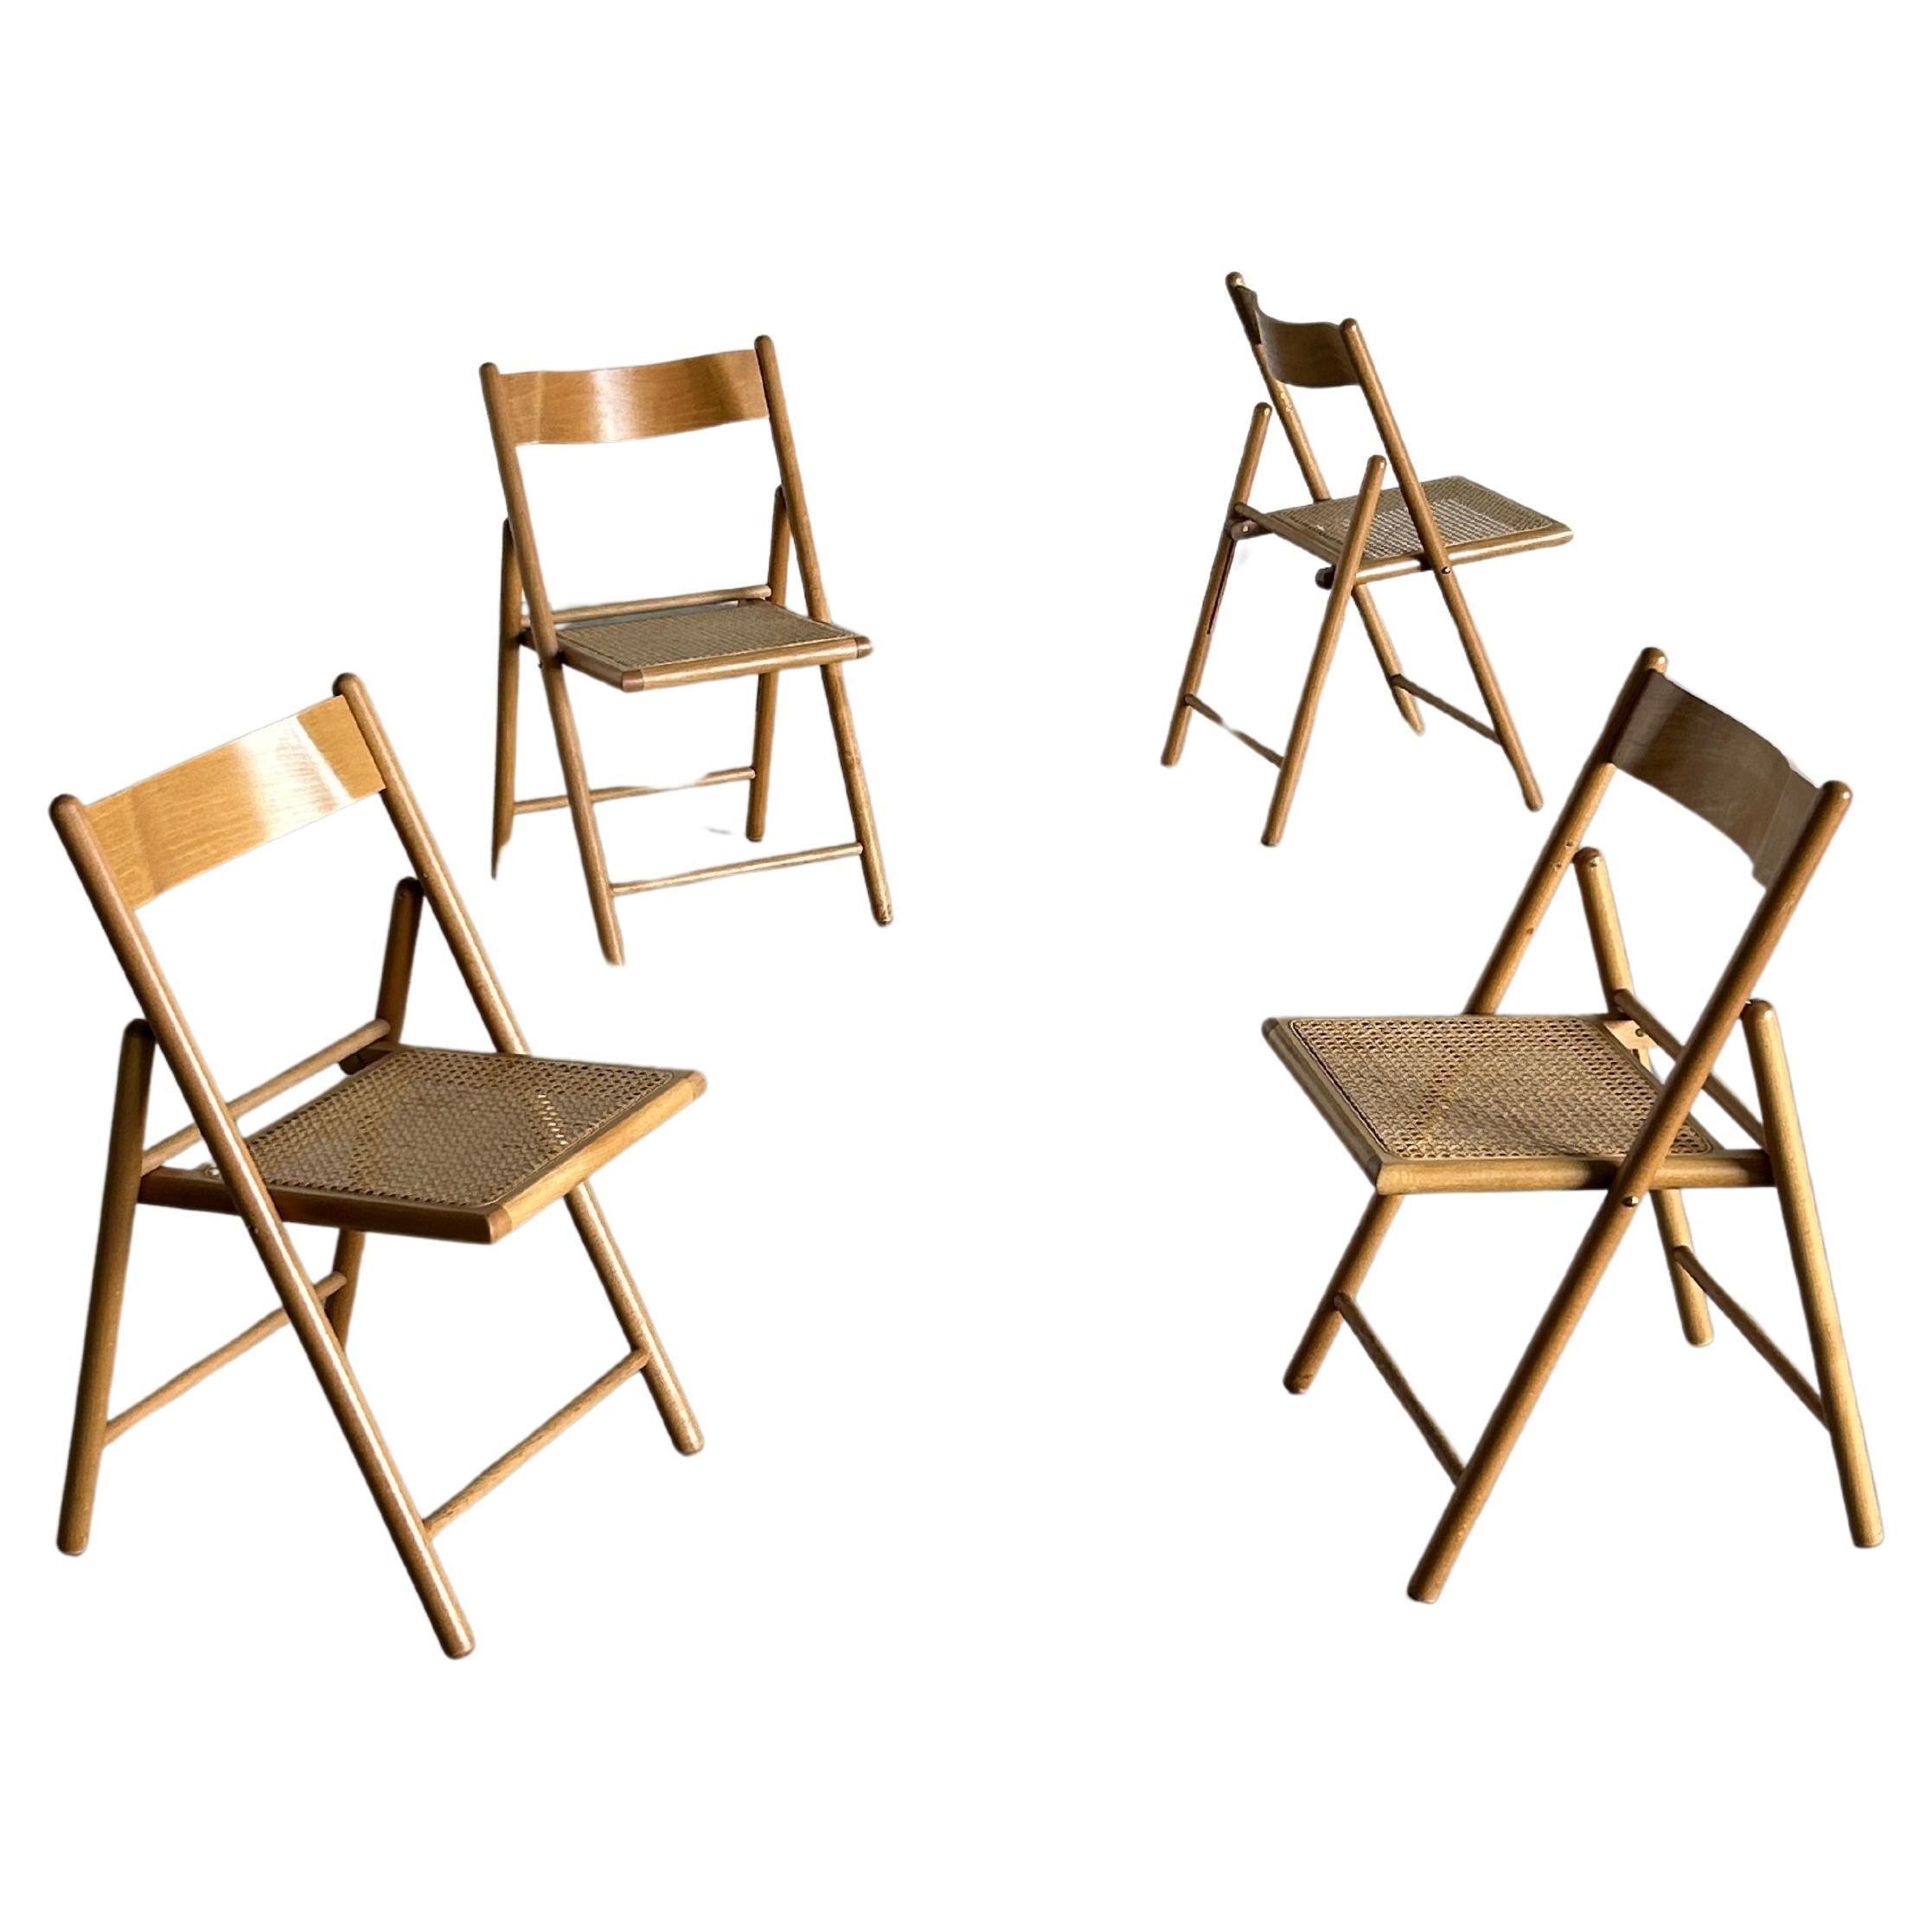 Set of 4 Vintage Wicker Cane and Beechwood Folding Chairs, 1970s Italian Design